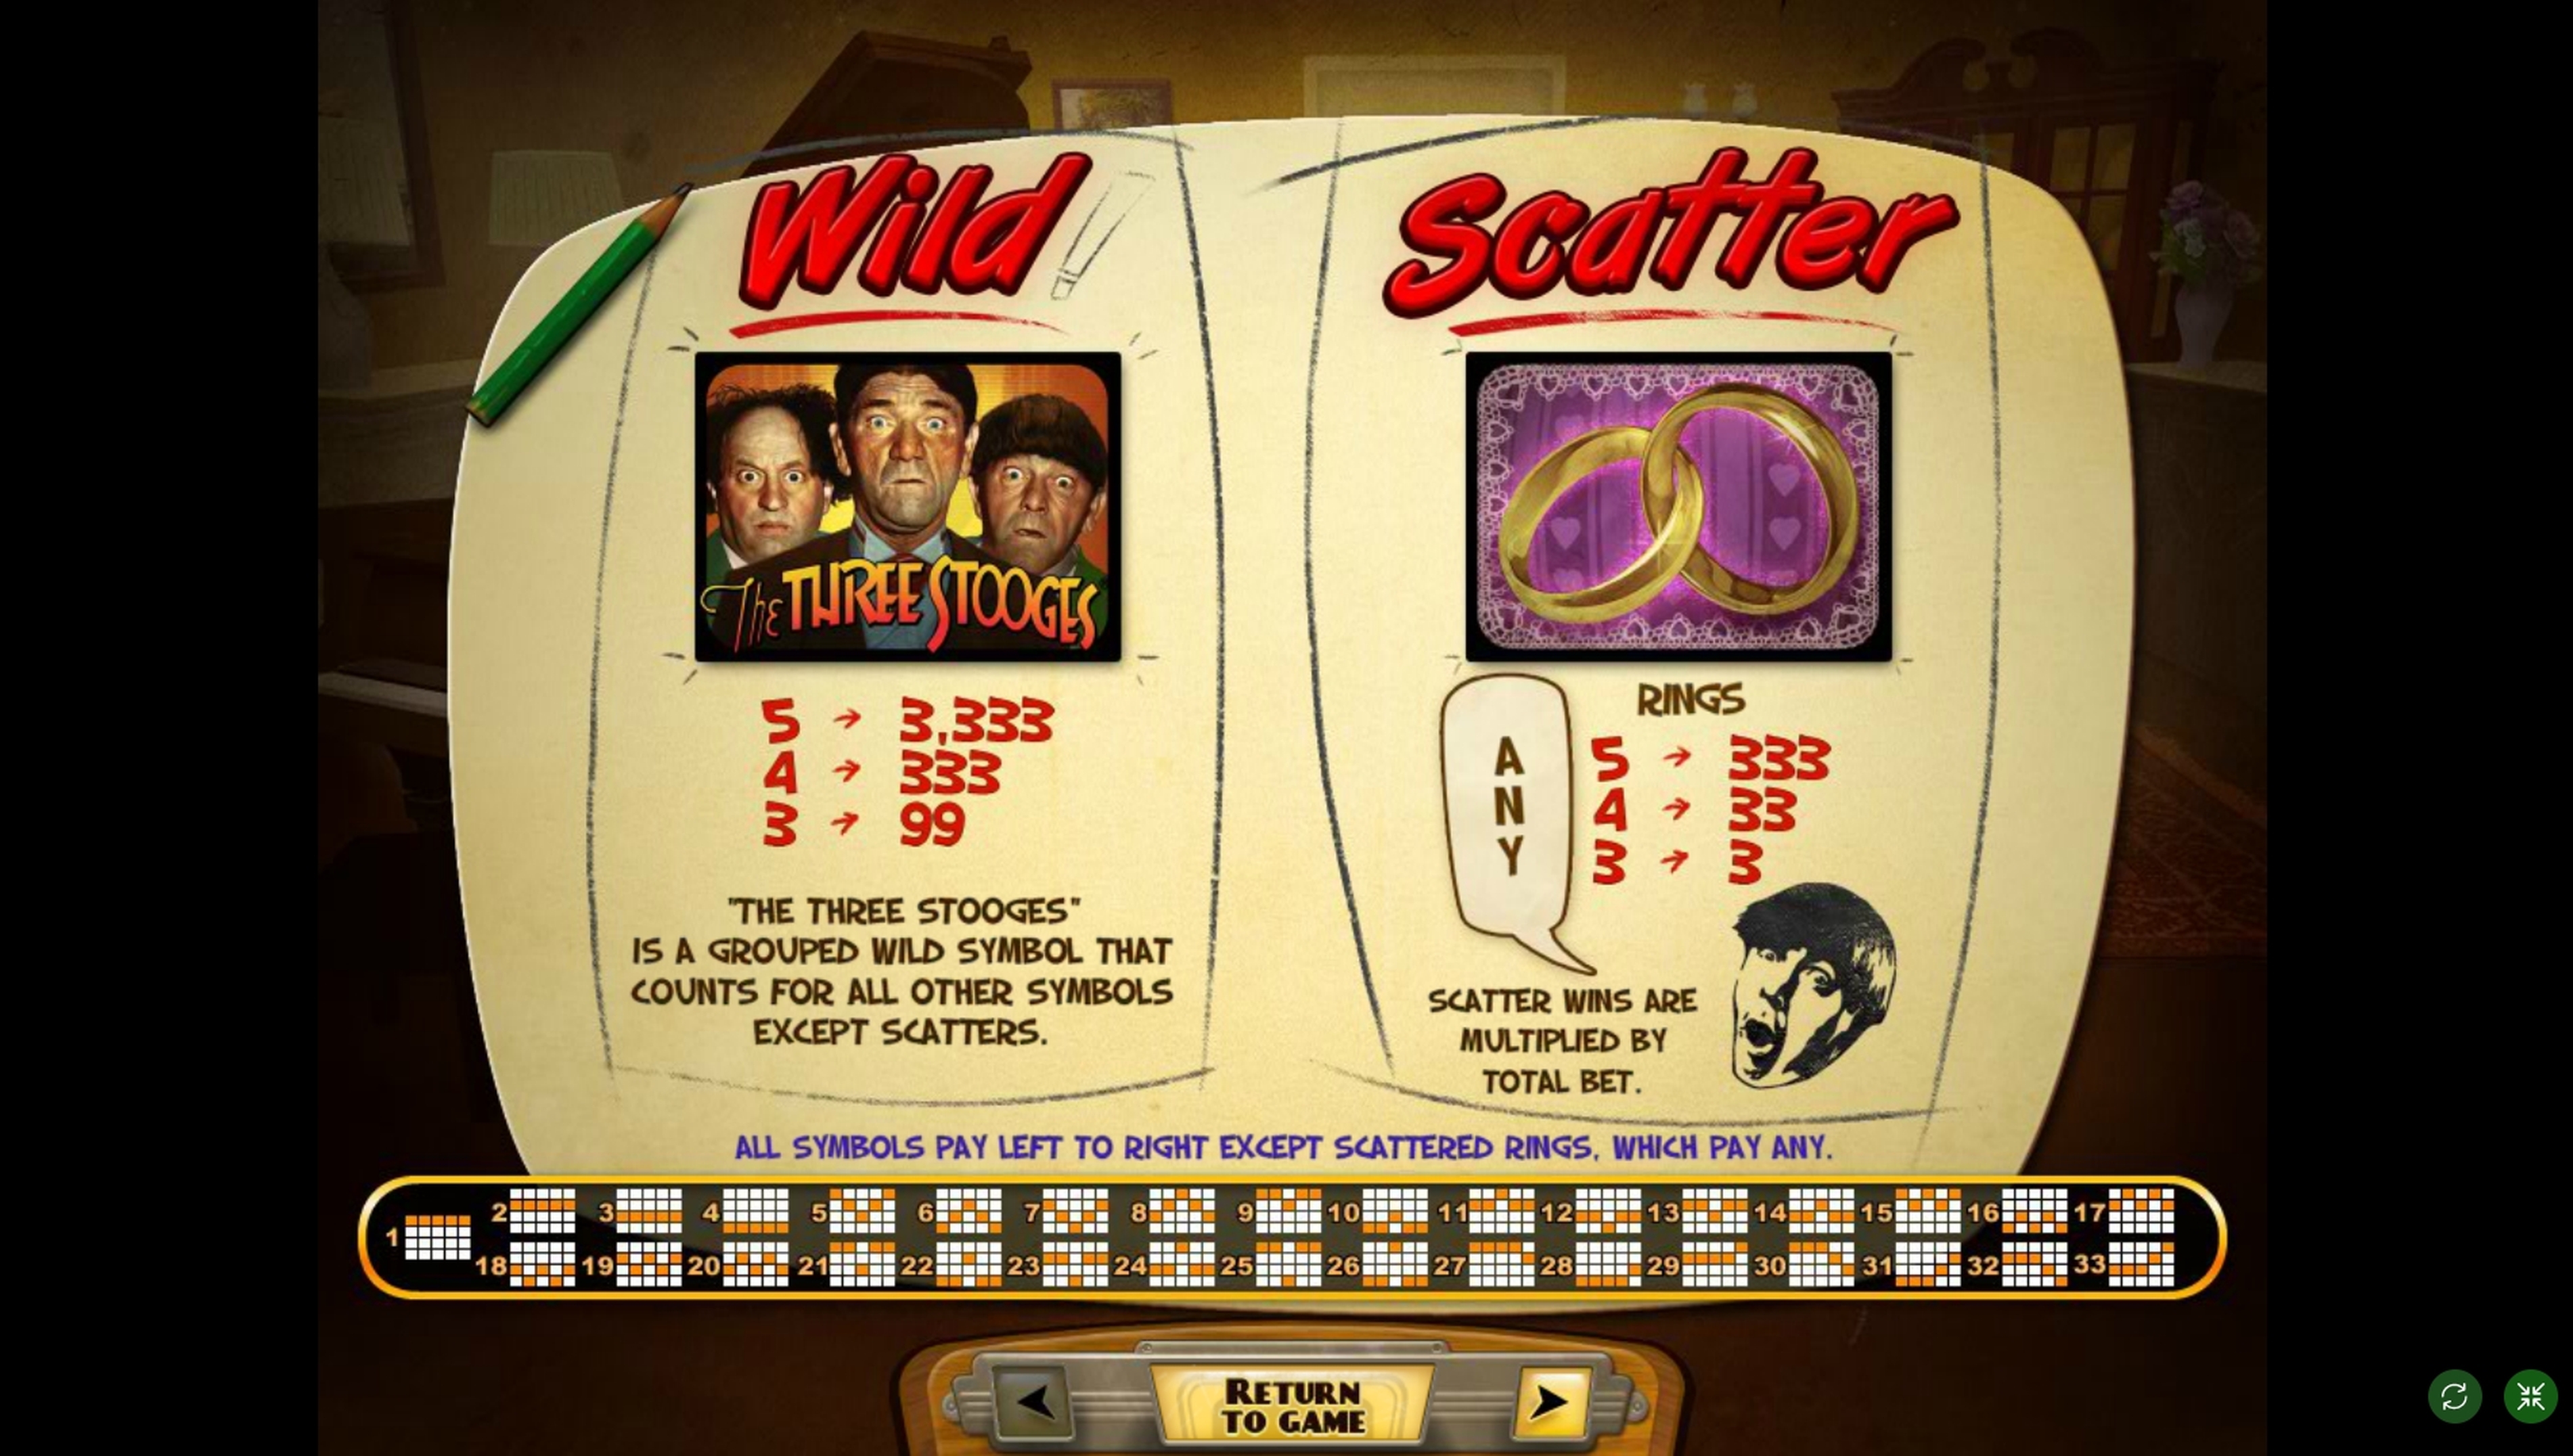 Play The Three Stooges - Brideless Groom Slot Machine Free with No Download